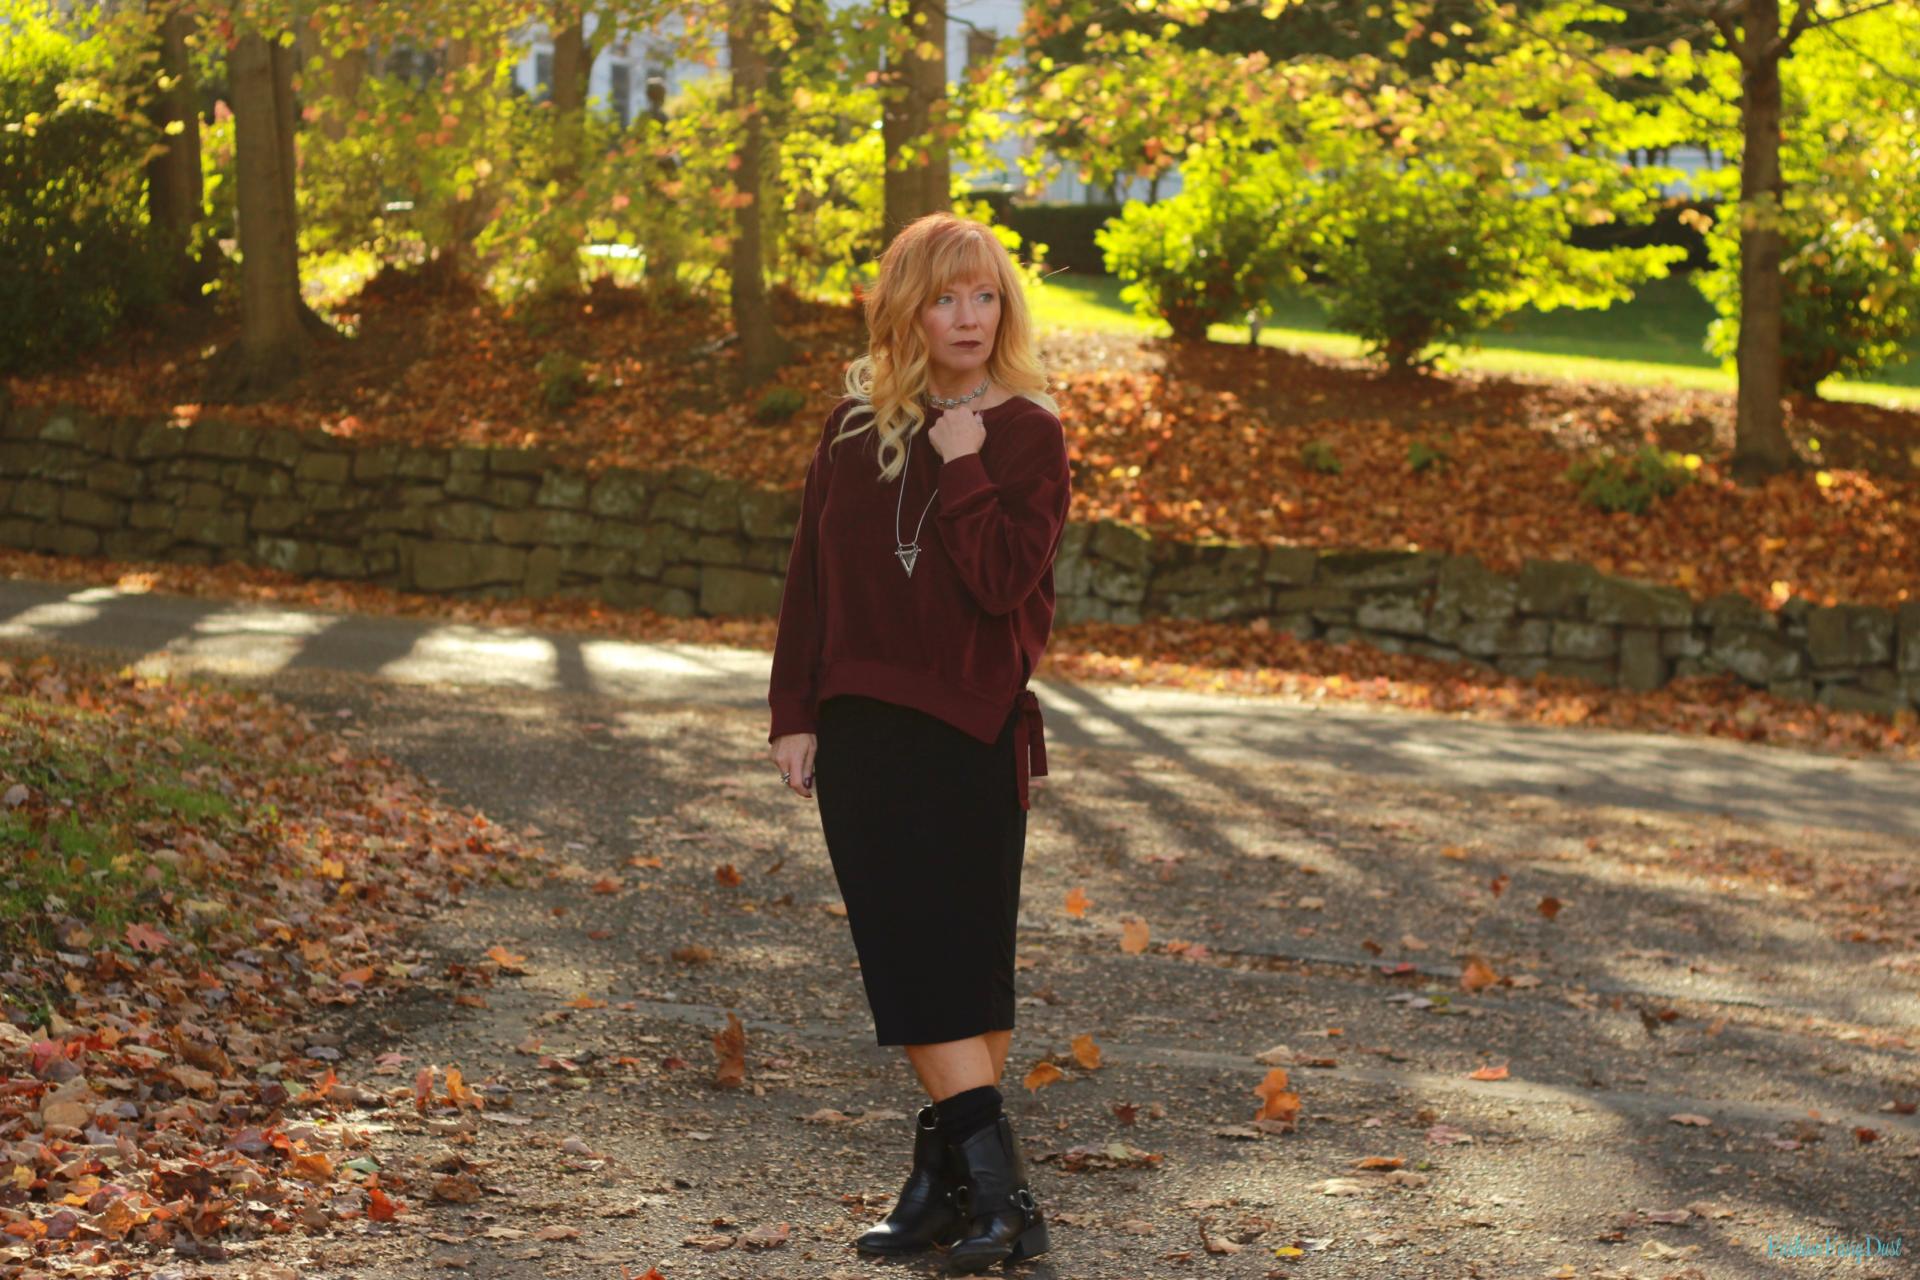 Burgundy velour top, midi pencil skirt and moto boots.